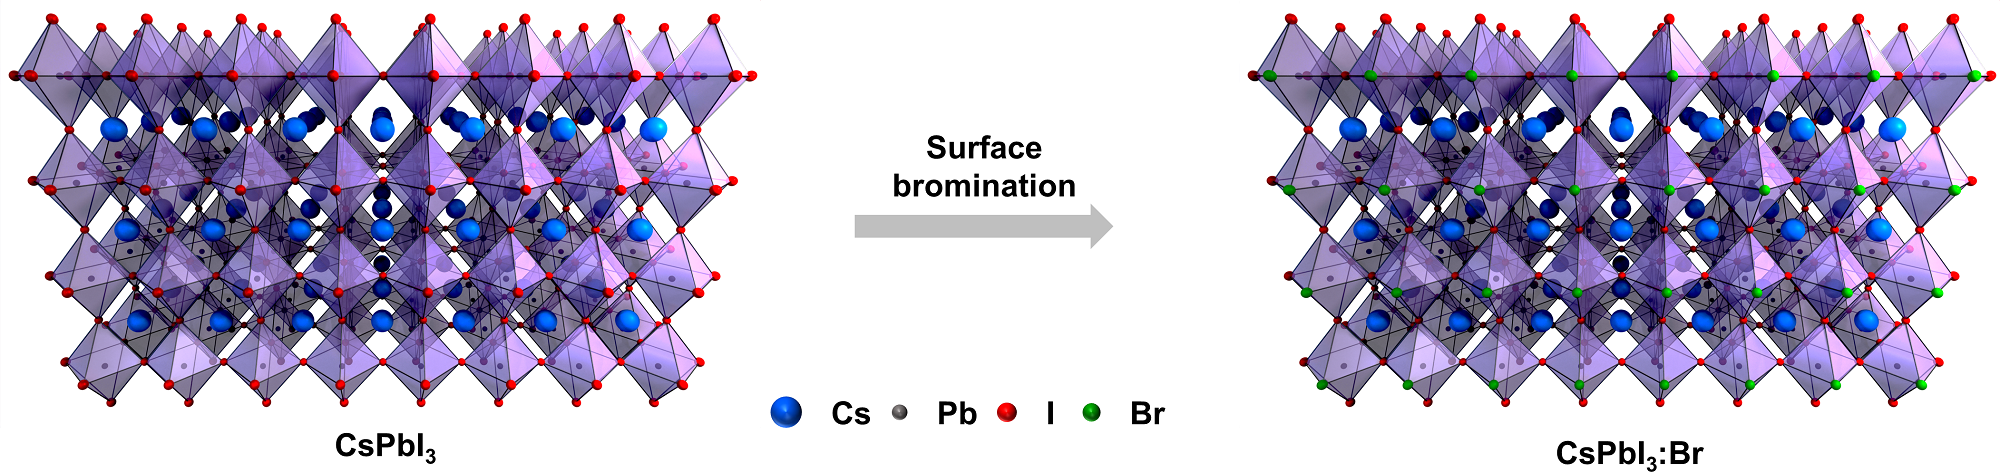 Schematic illustration depicting the atomic structure of CsPbI3 PeNCs before and after the surface brominatio